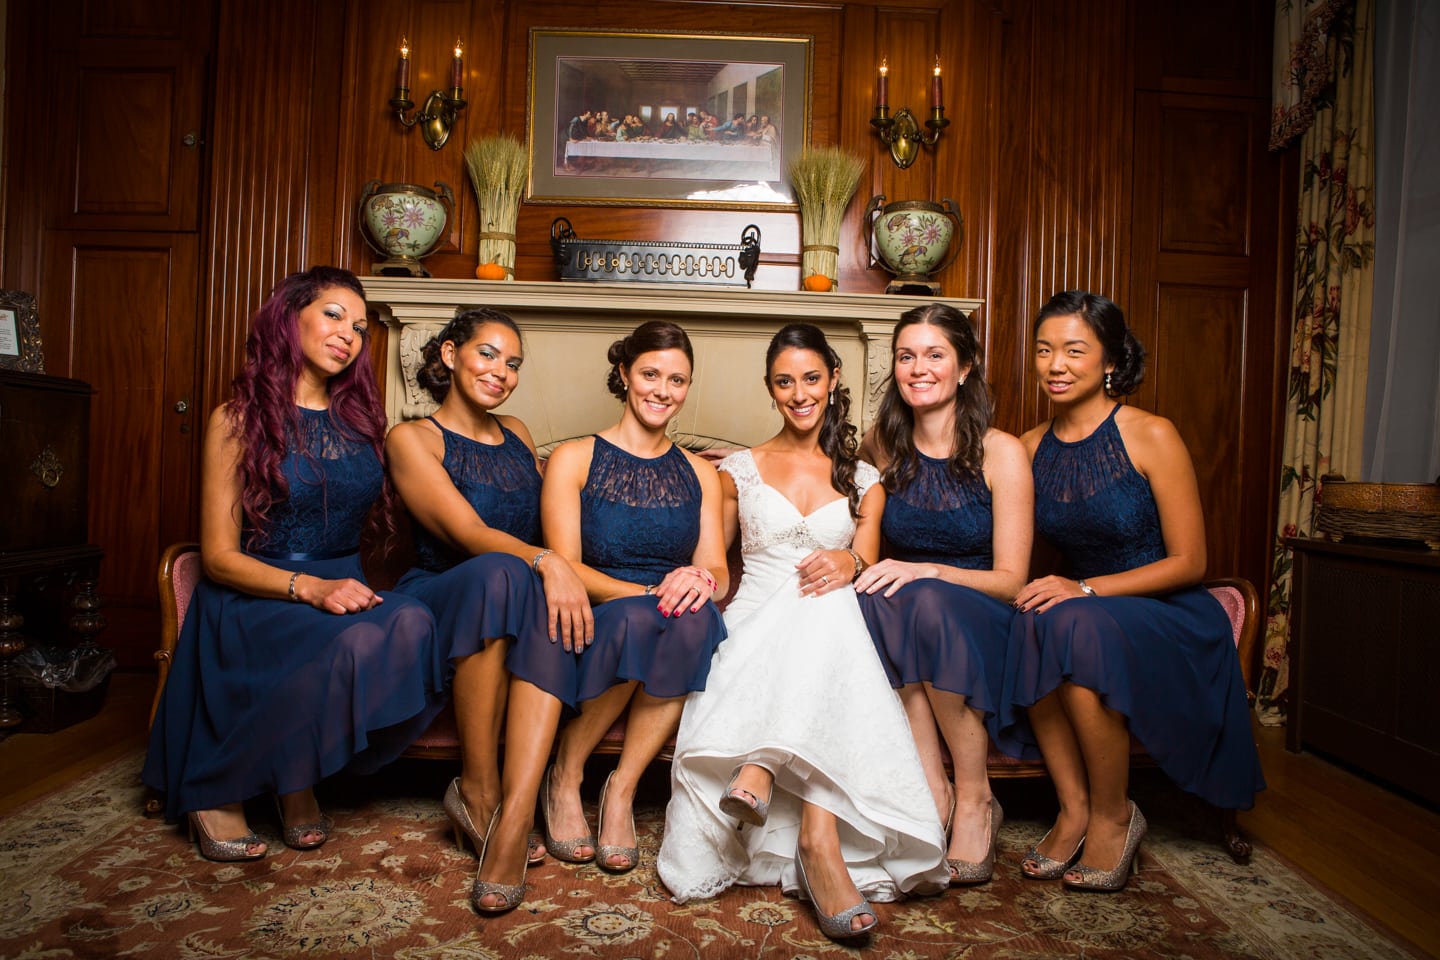 Here is a bridal party that coordinated their event with us at our seacoast nh hotel. The bride and bridal party are sitting on an aged red victorian couch. The bridesmaids are in blue dresses.